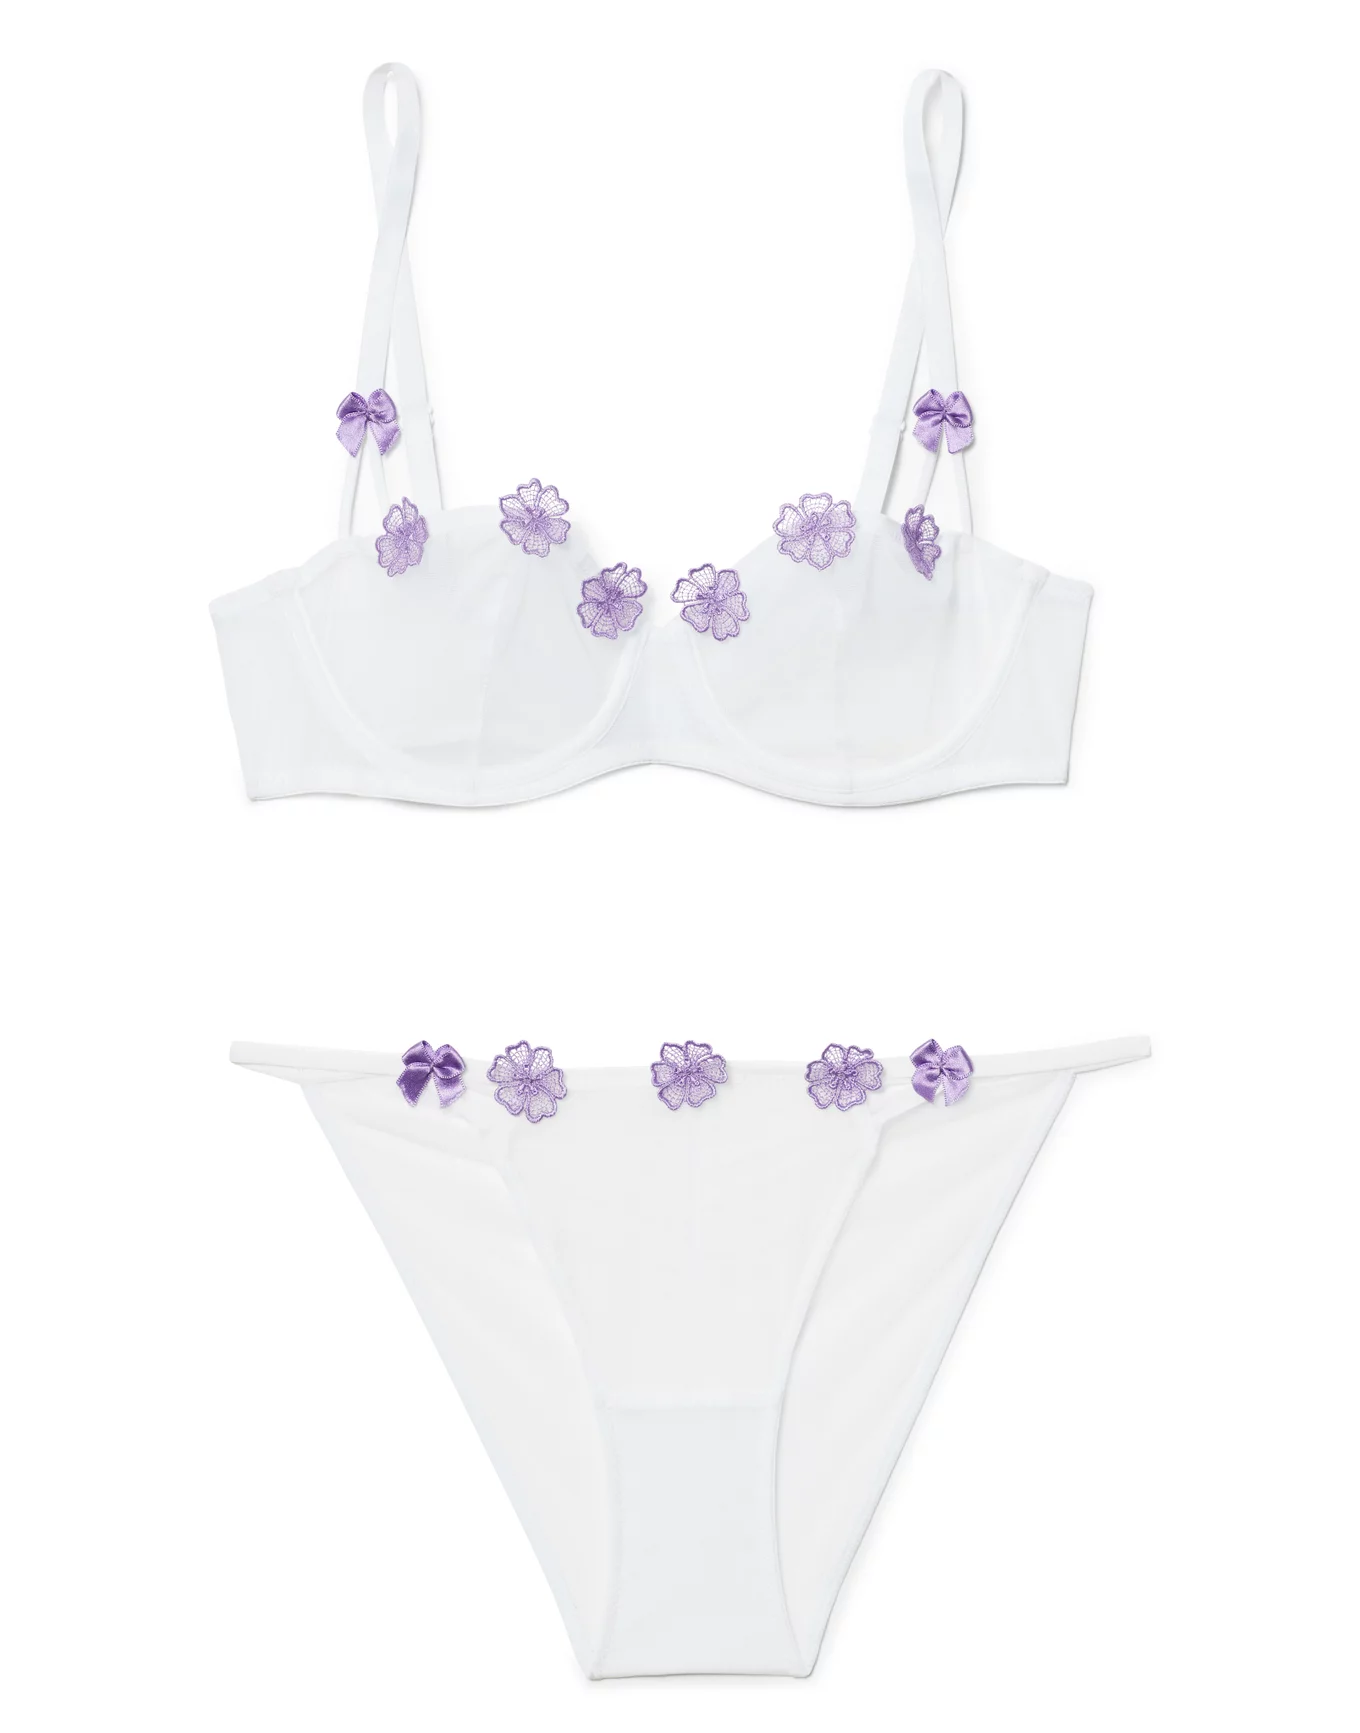 Gynger White Unlined Balconette, L-XL Adore Me, 59% OFF